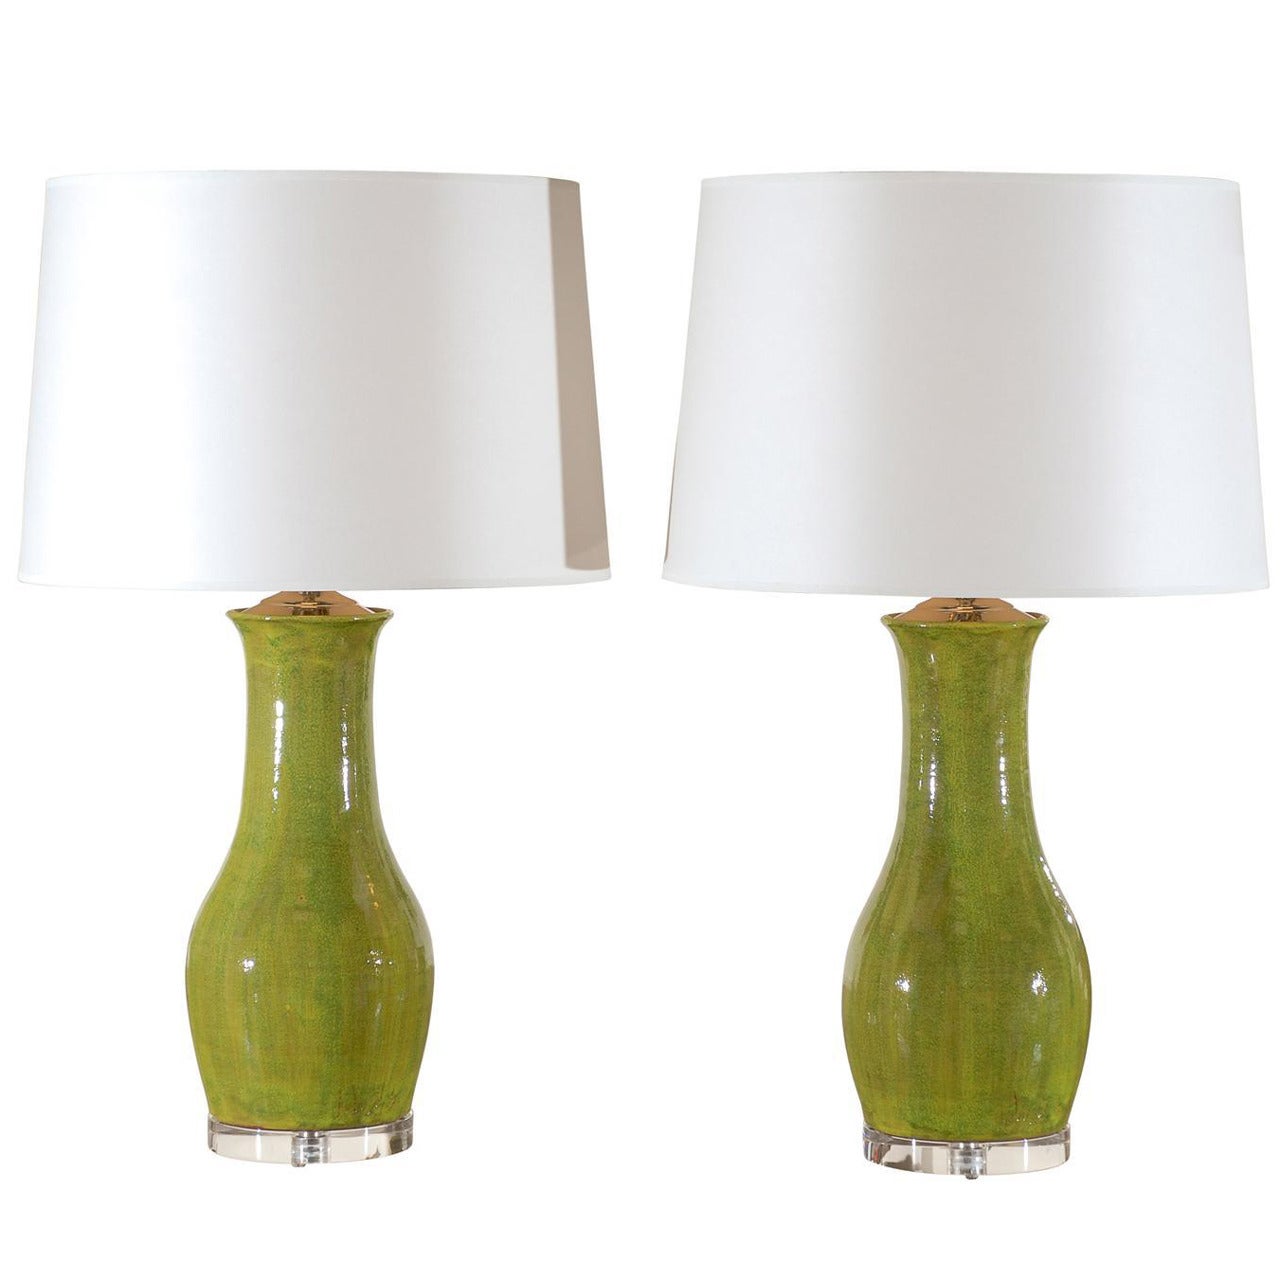 Pair of Charlie West Pottery Lamps